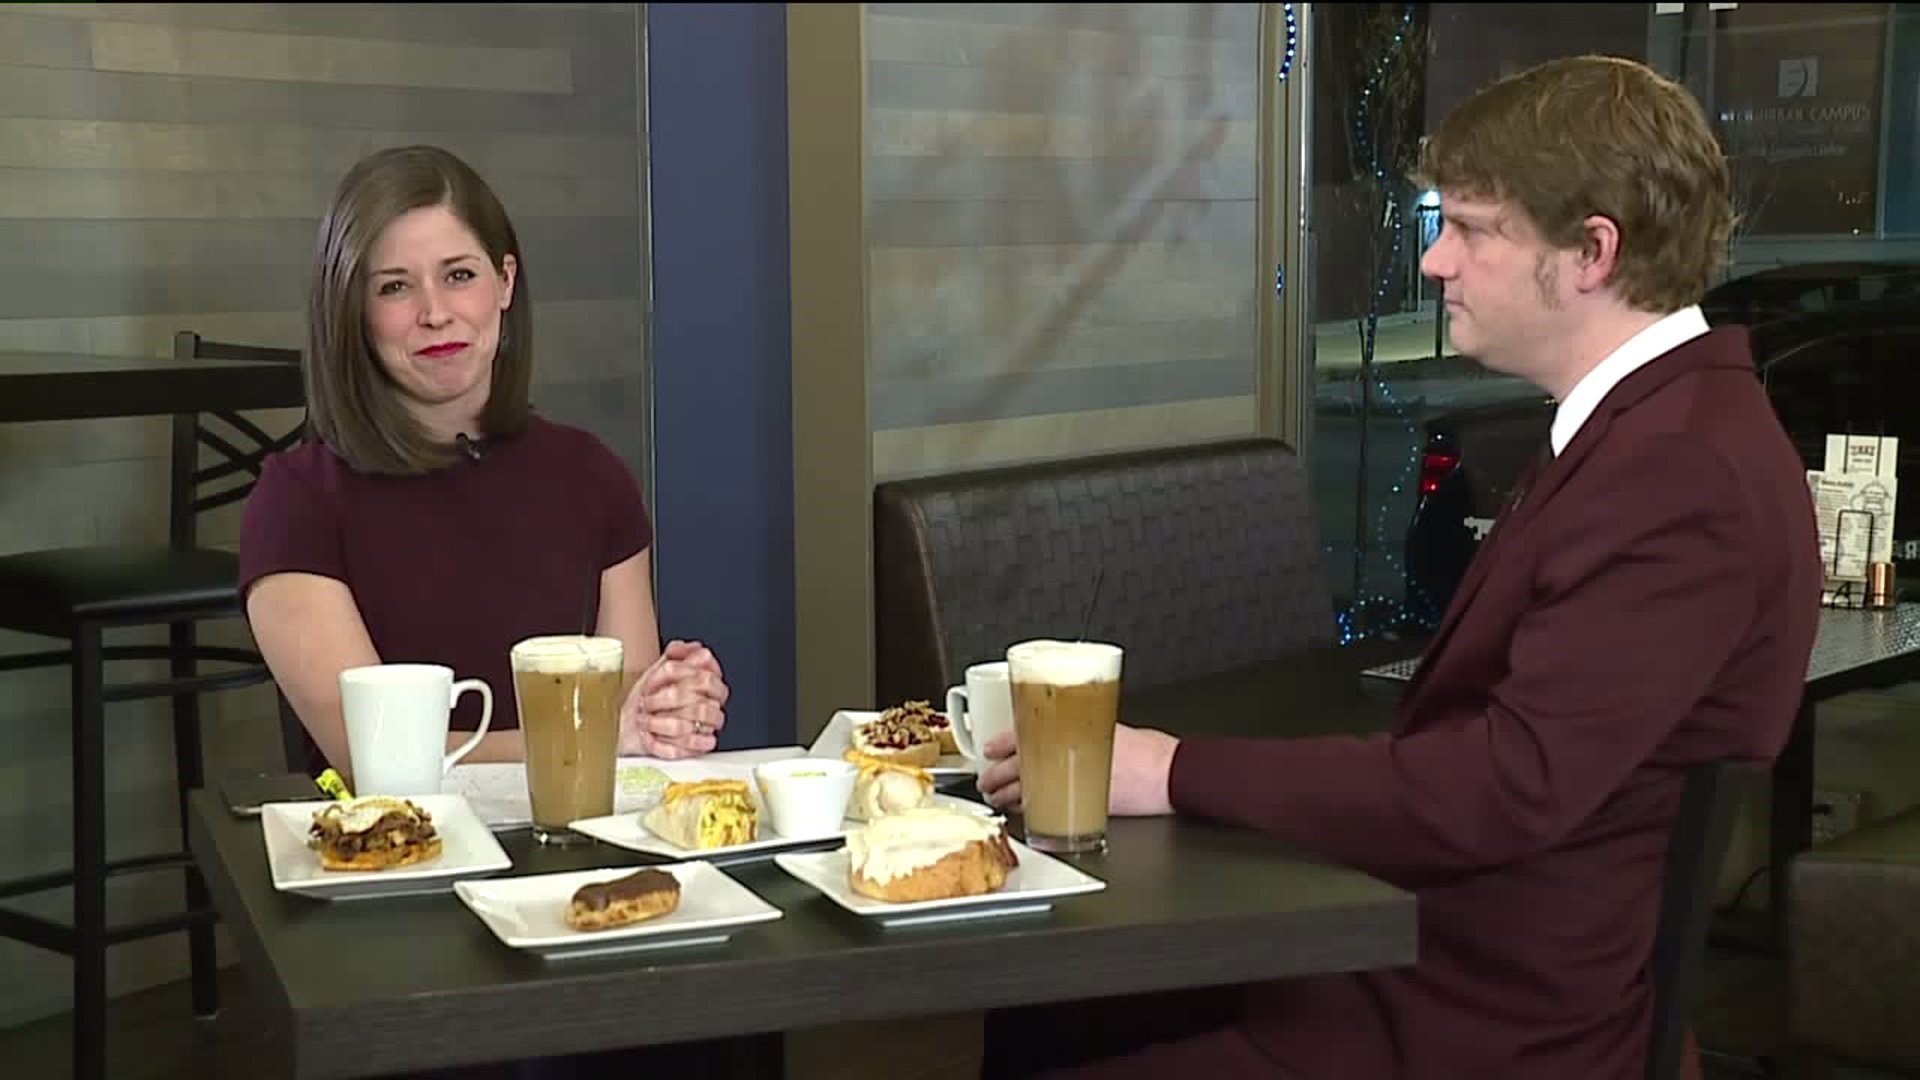 Breakfast With Kyle Carter: Future of Downtown Davenport